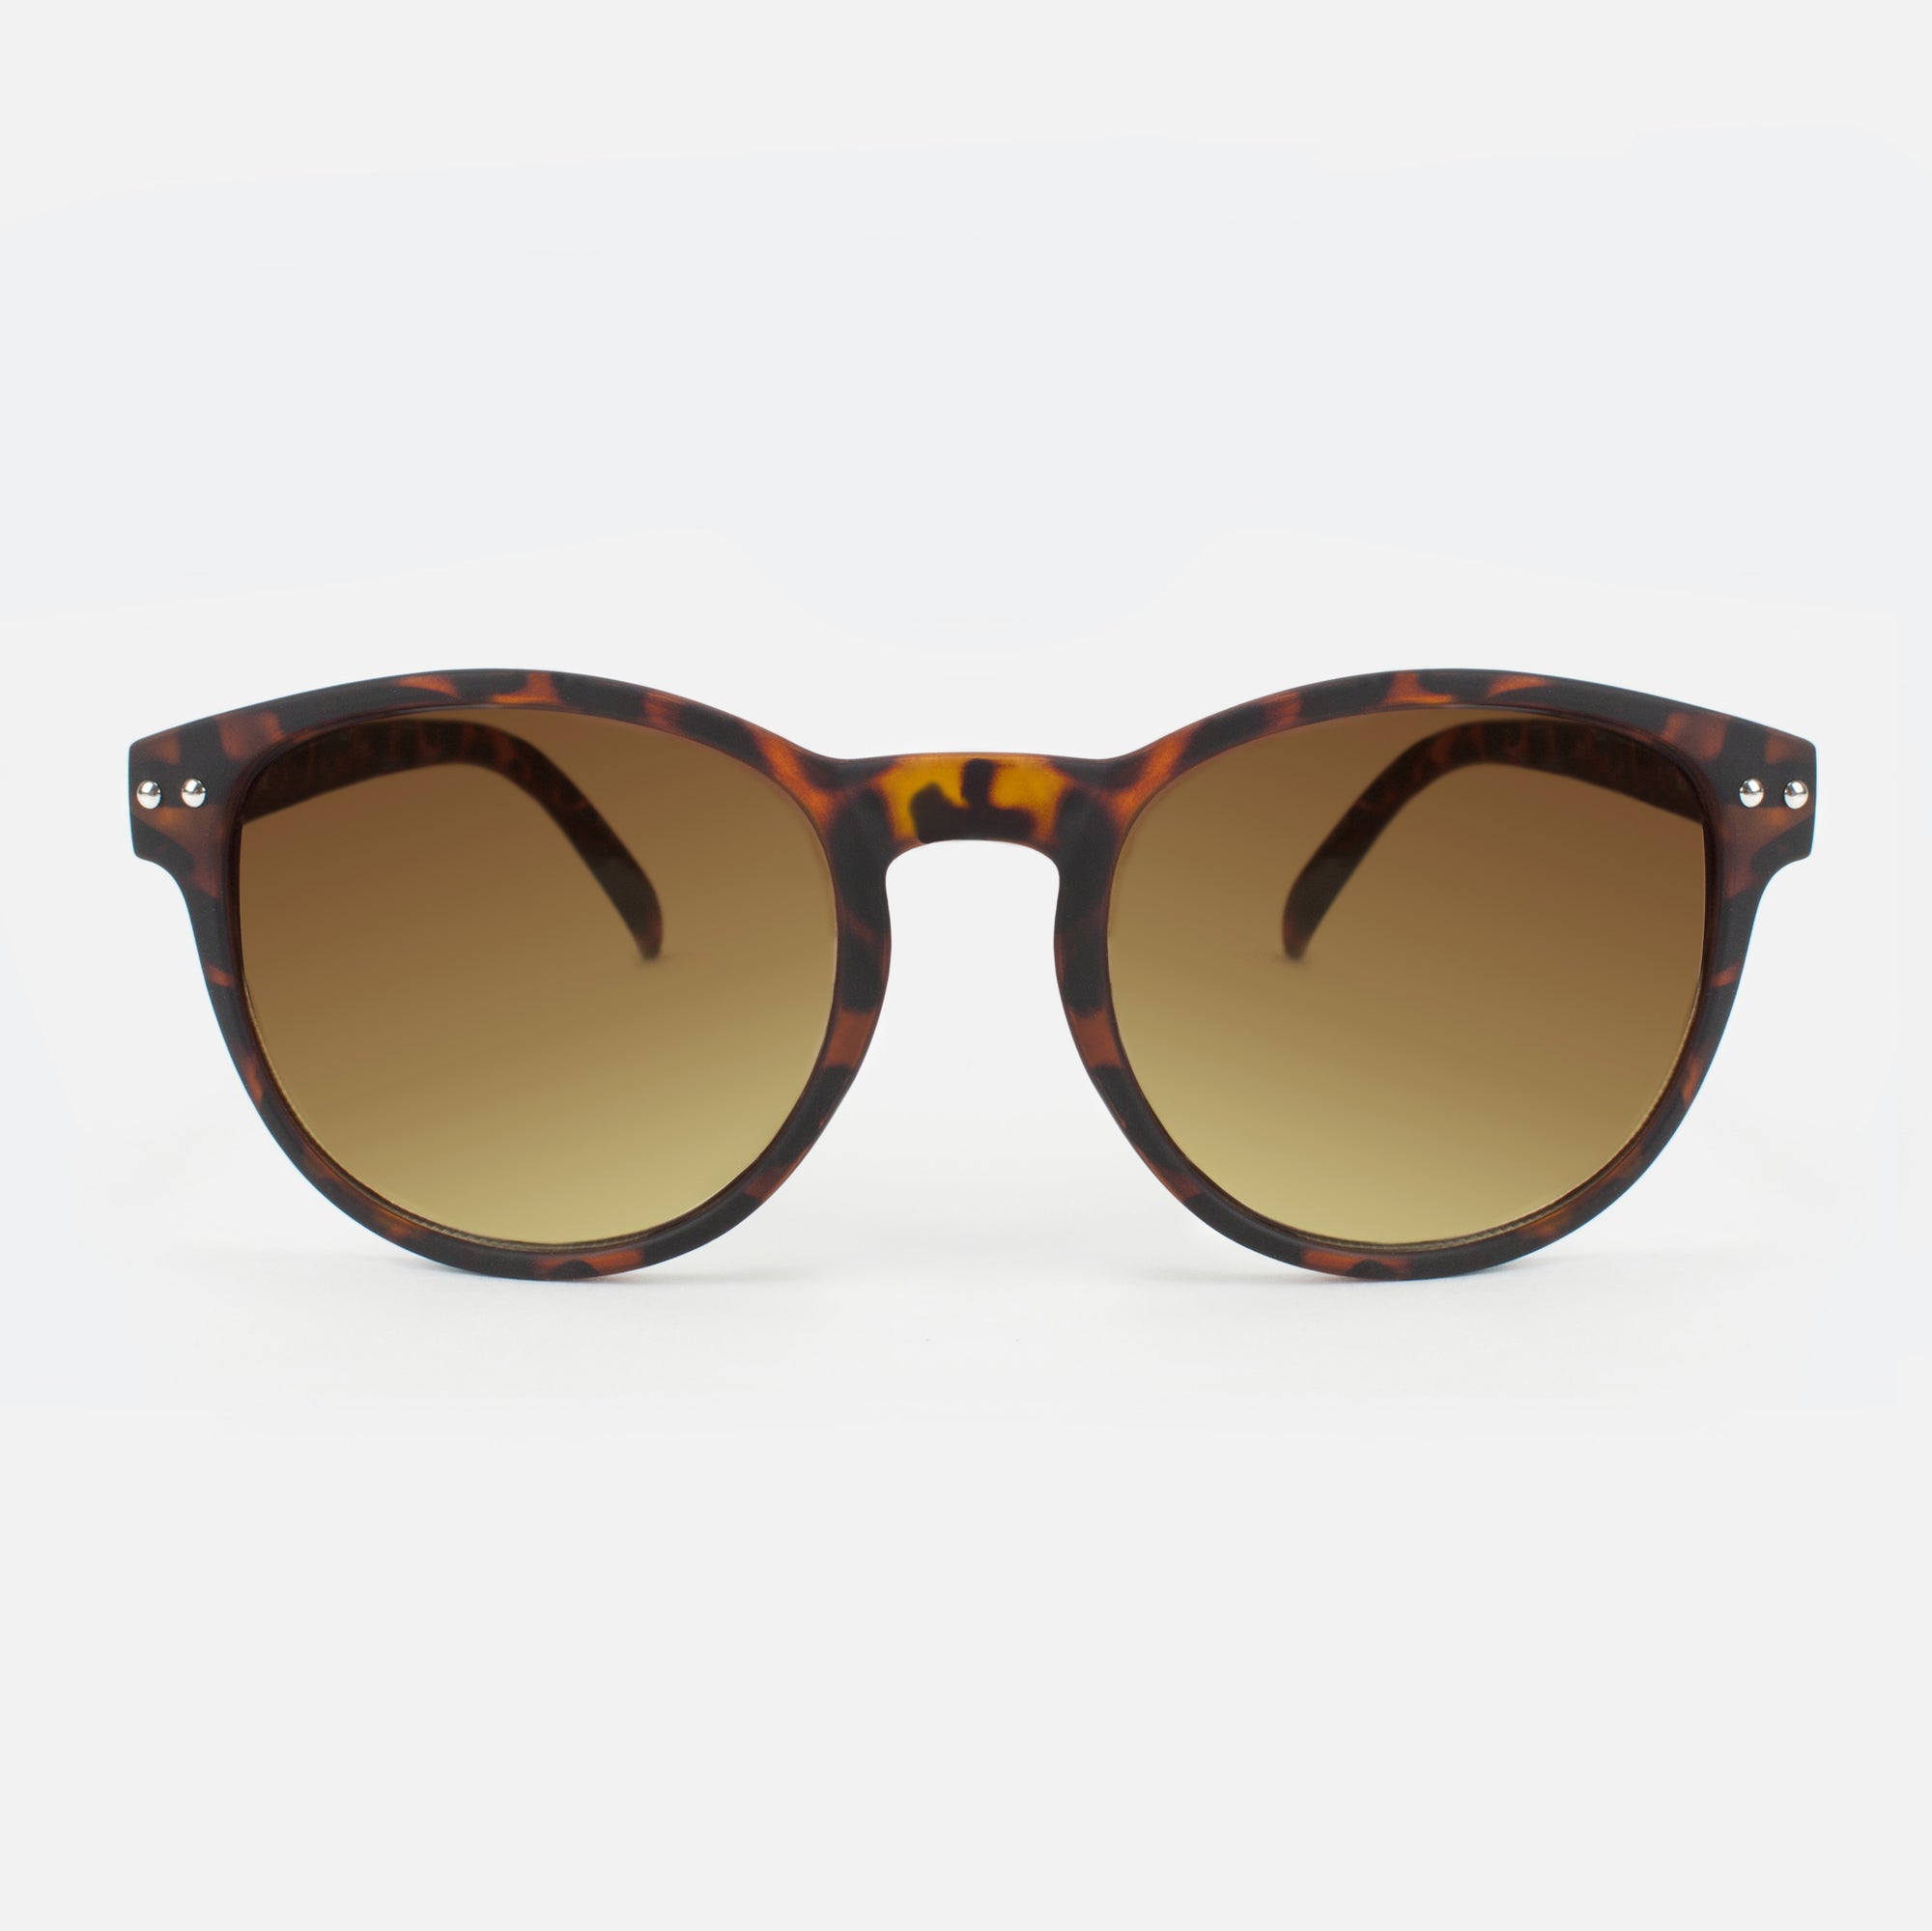 Brown sunglasses with tortoise frame